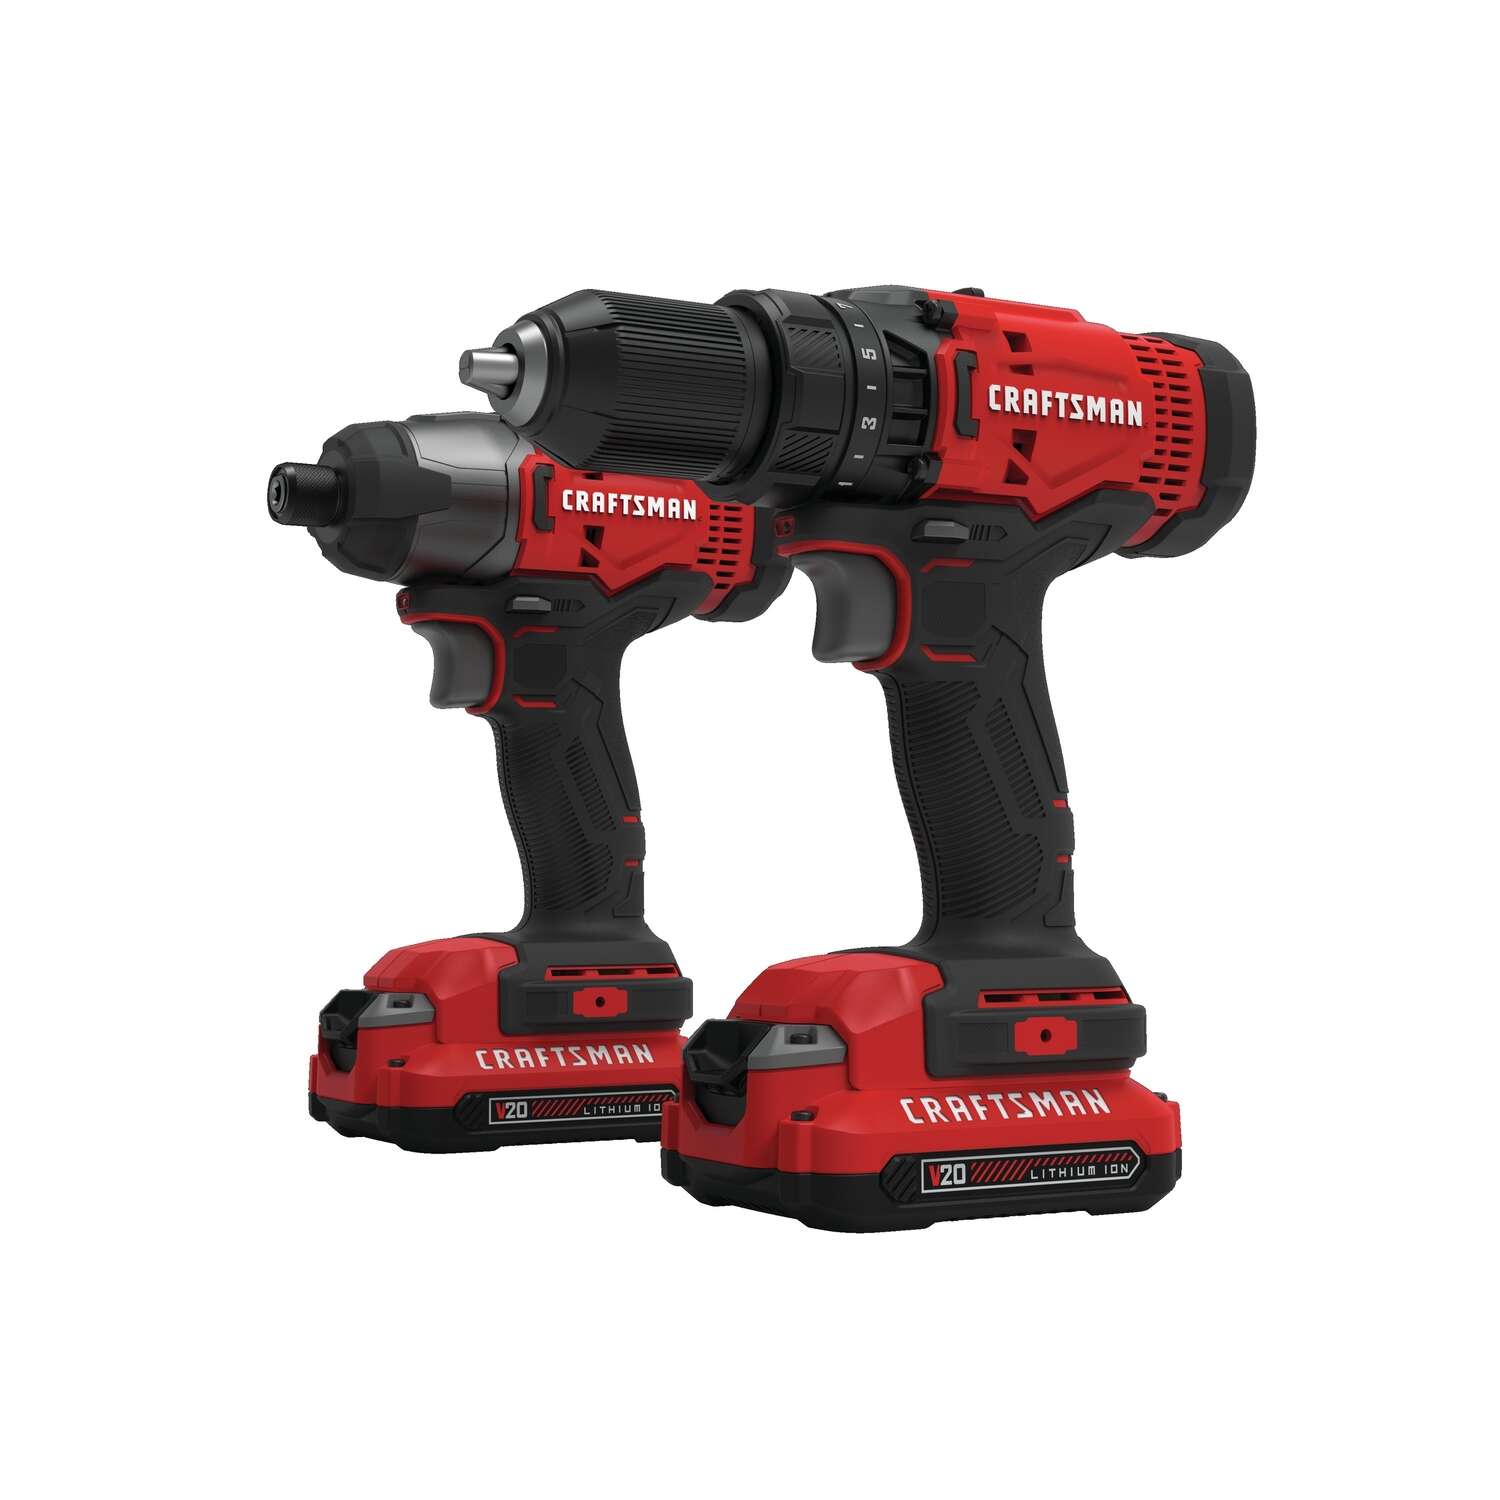 Craftsman MAX 20 V Cordless Brushed 2 Tool Drill/Driver and Impact Driver Kit on Sale At VigLink Optimize Merchants